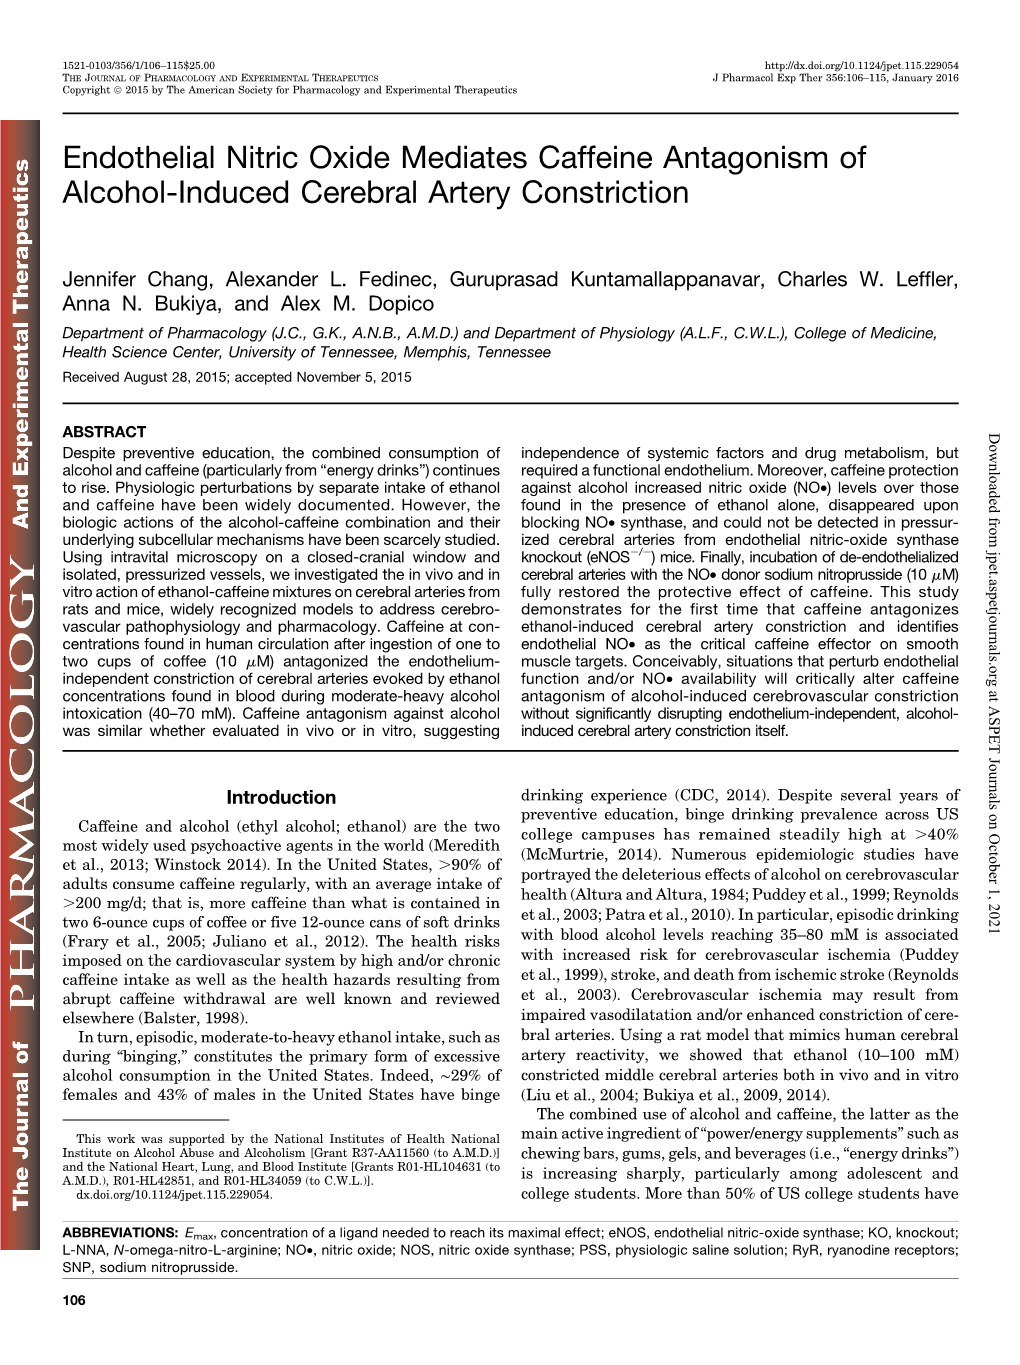 Endothelial Nitric Oxide Mediates Caffeine Antagonism of Alcohol-Induced Cerebral Artery Constriction